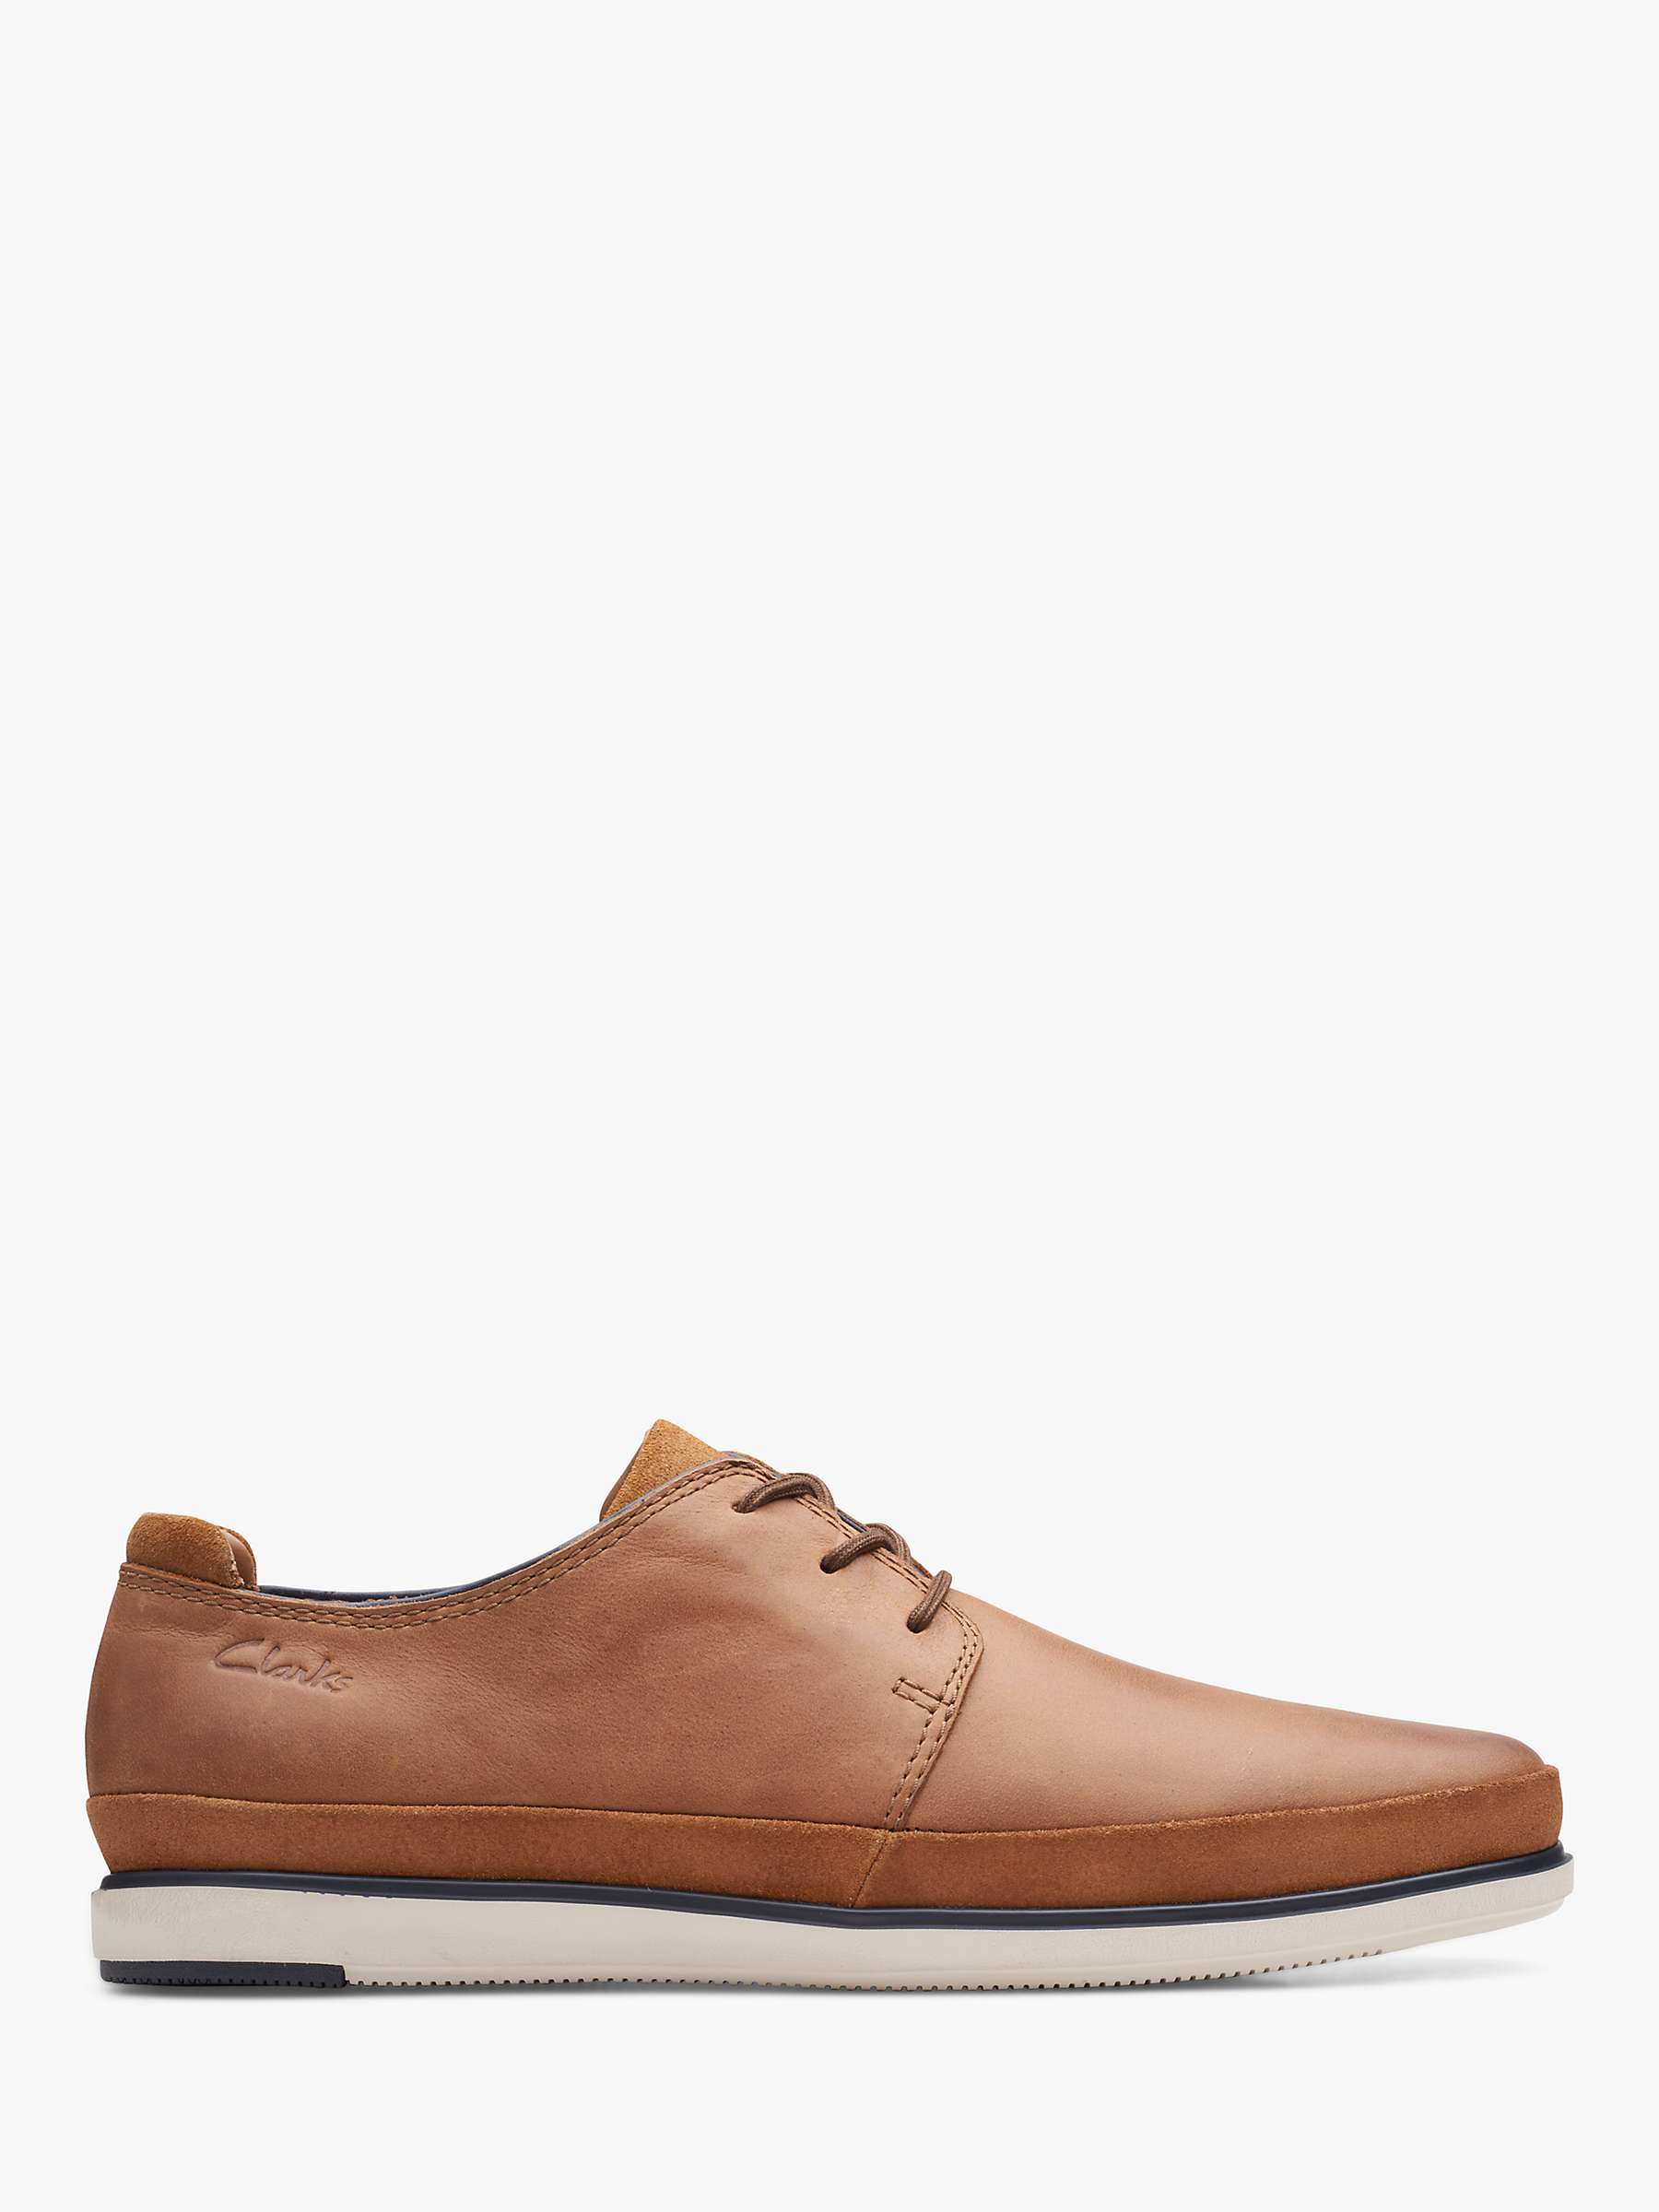 Clarks Bratton Lace Up Casual Leather Shoes, Dark Tan at John Lewis ...